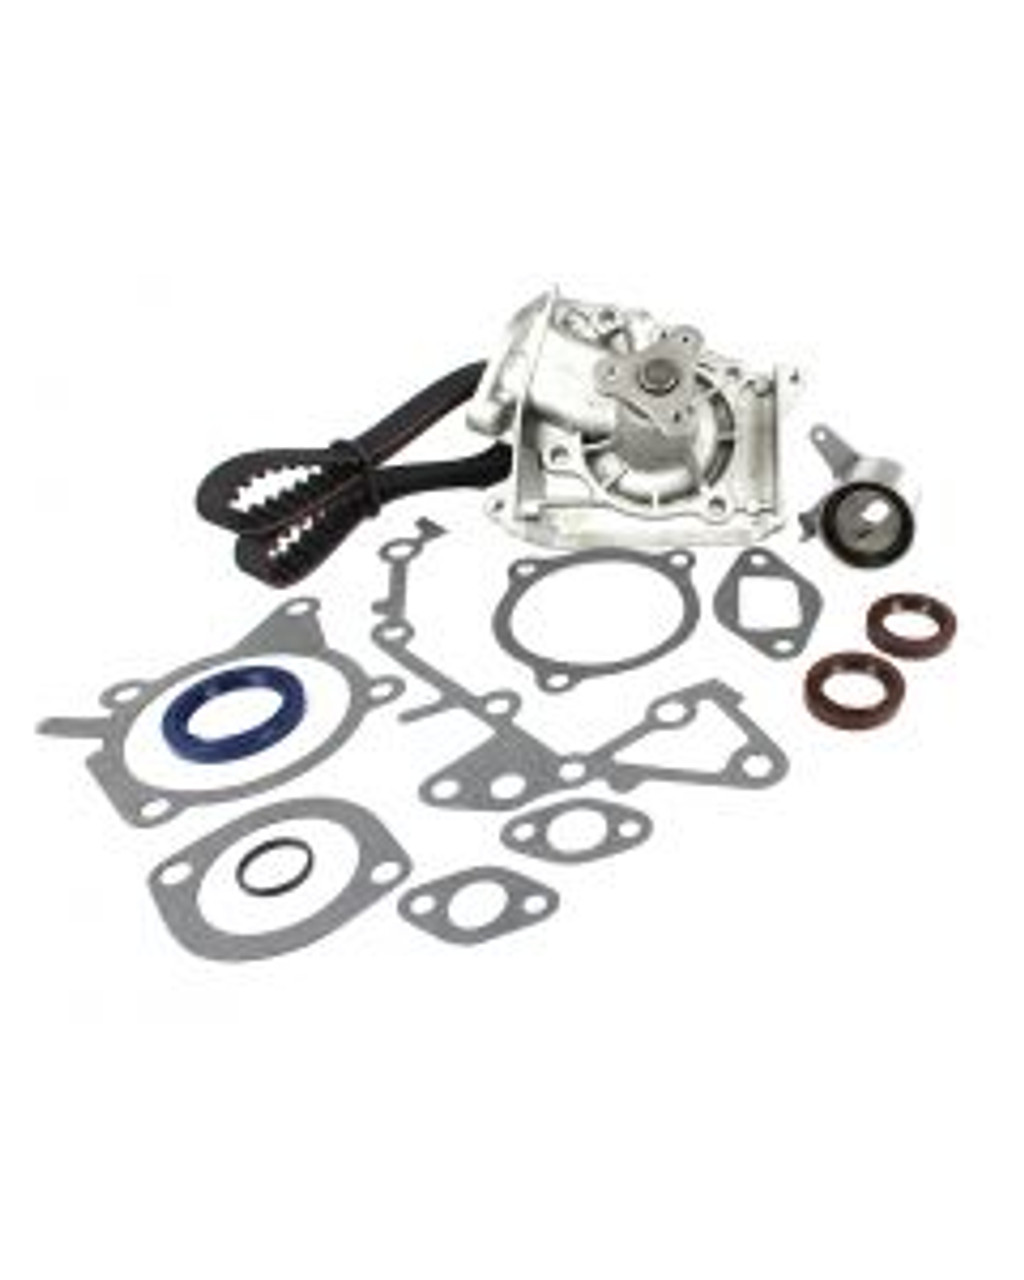 Timing Belt Kit with Water Pump 1.6L 1994 Mazda 323 - TBK451WP.13